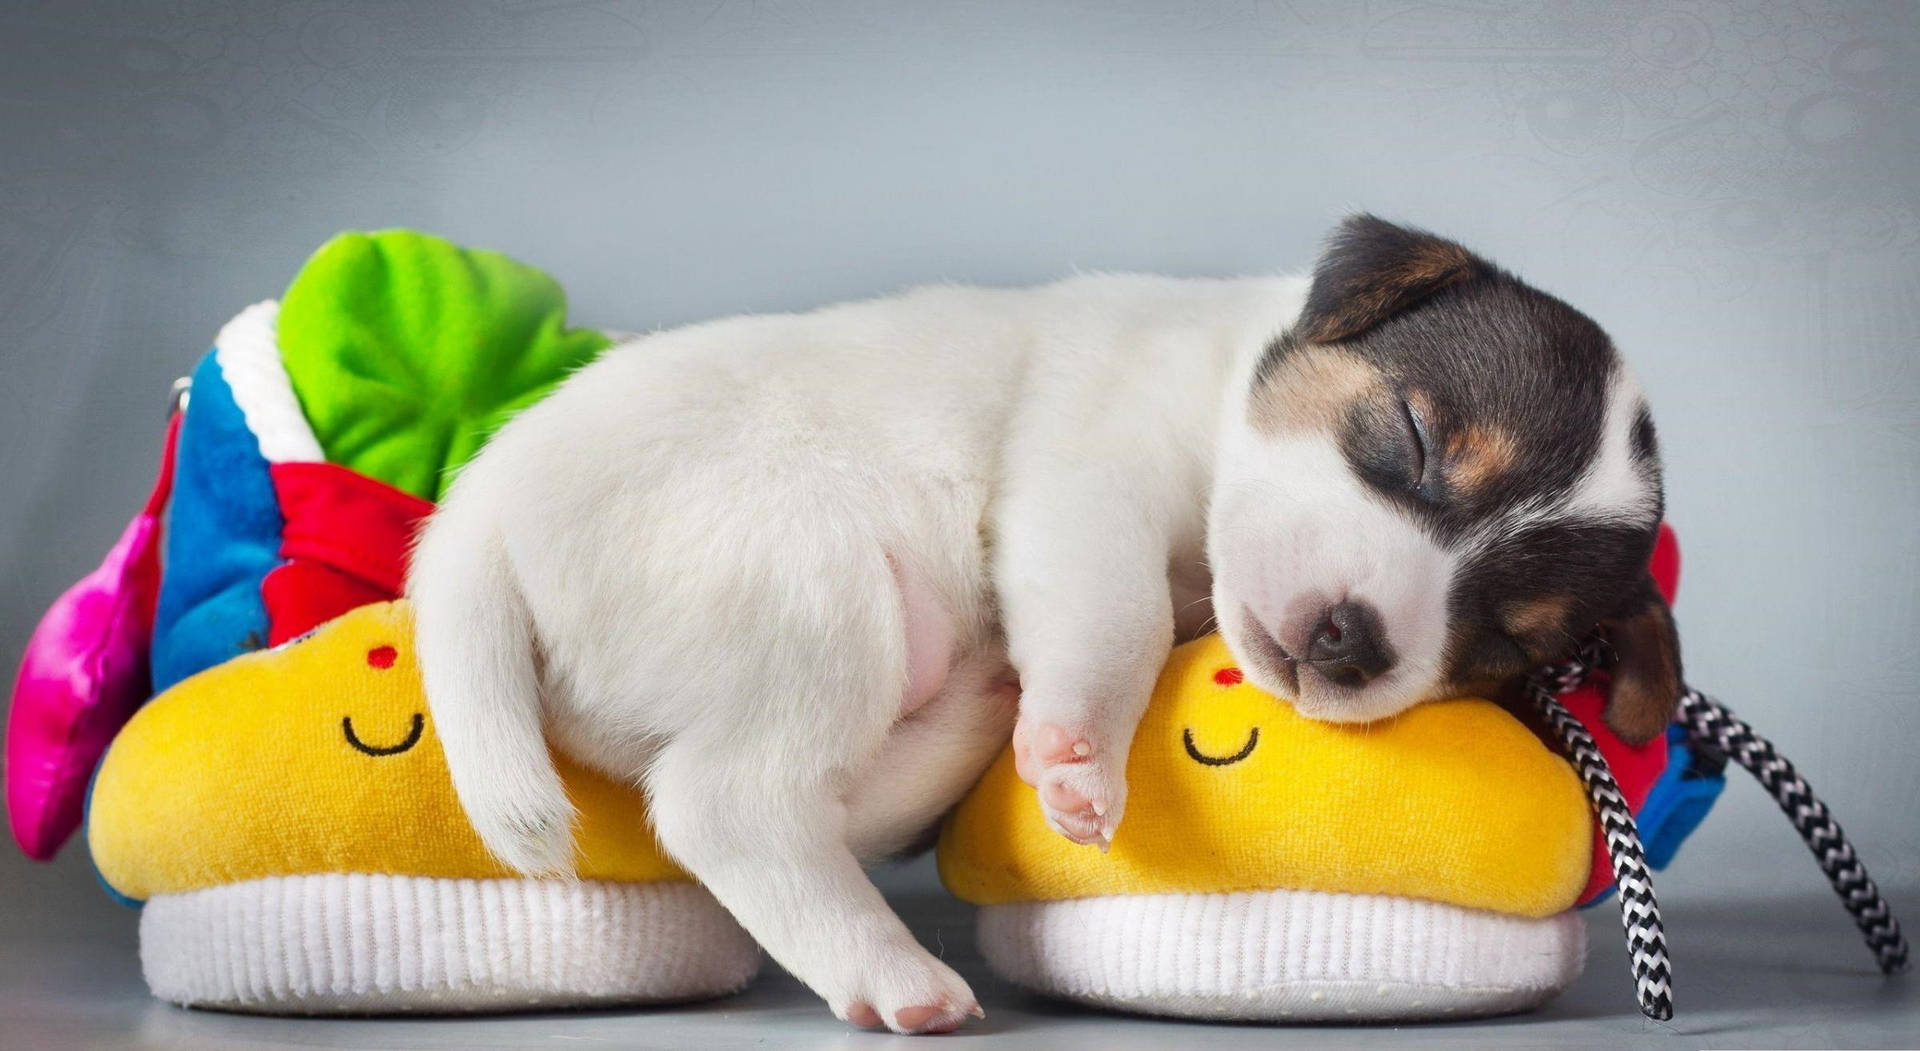 Cute Sleeping Baby Dog With Pillow Toys Background